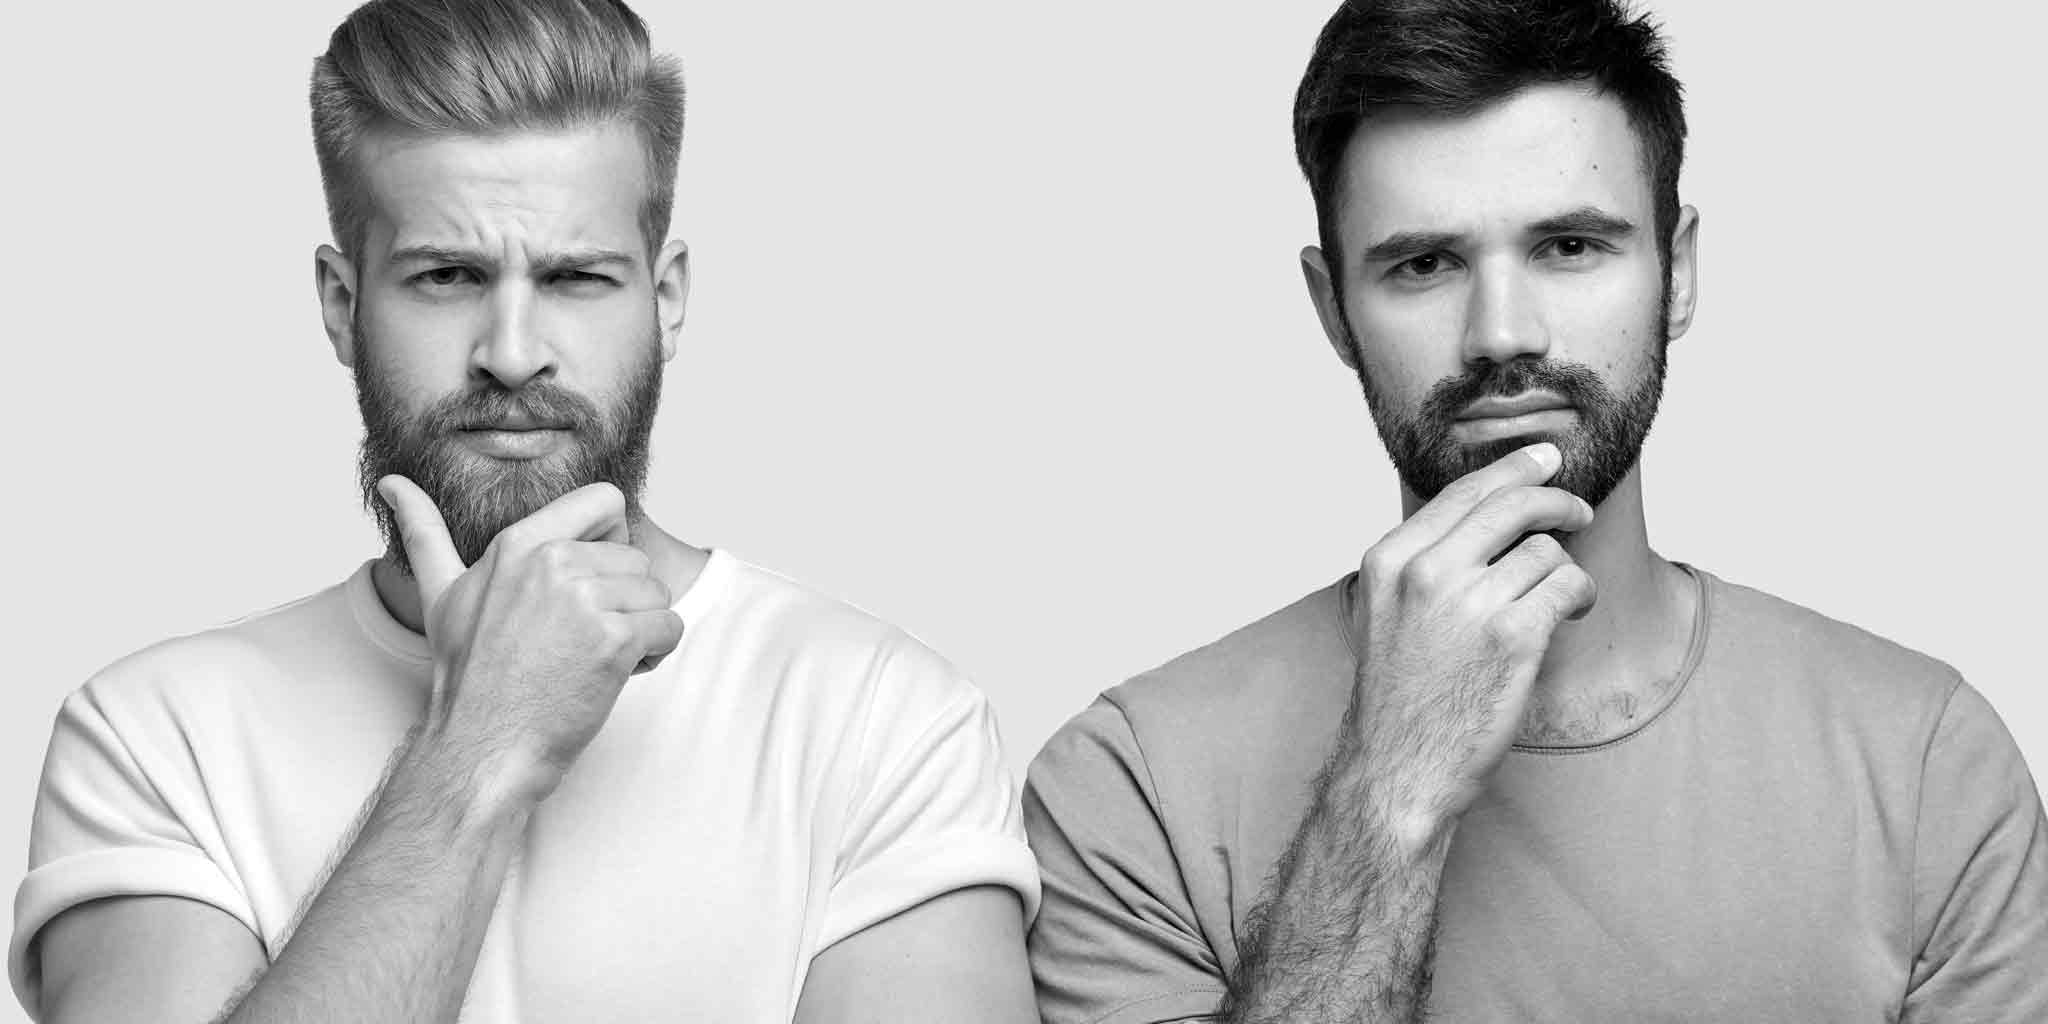 Black and white image featuring two men with beards and short hair, each in a thoughtful pose with one hand on their chin, possibly contemplating the common myths surrounding men's Brazilian waxing.